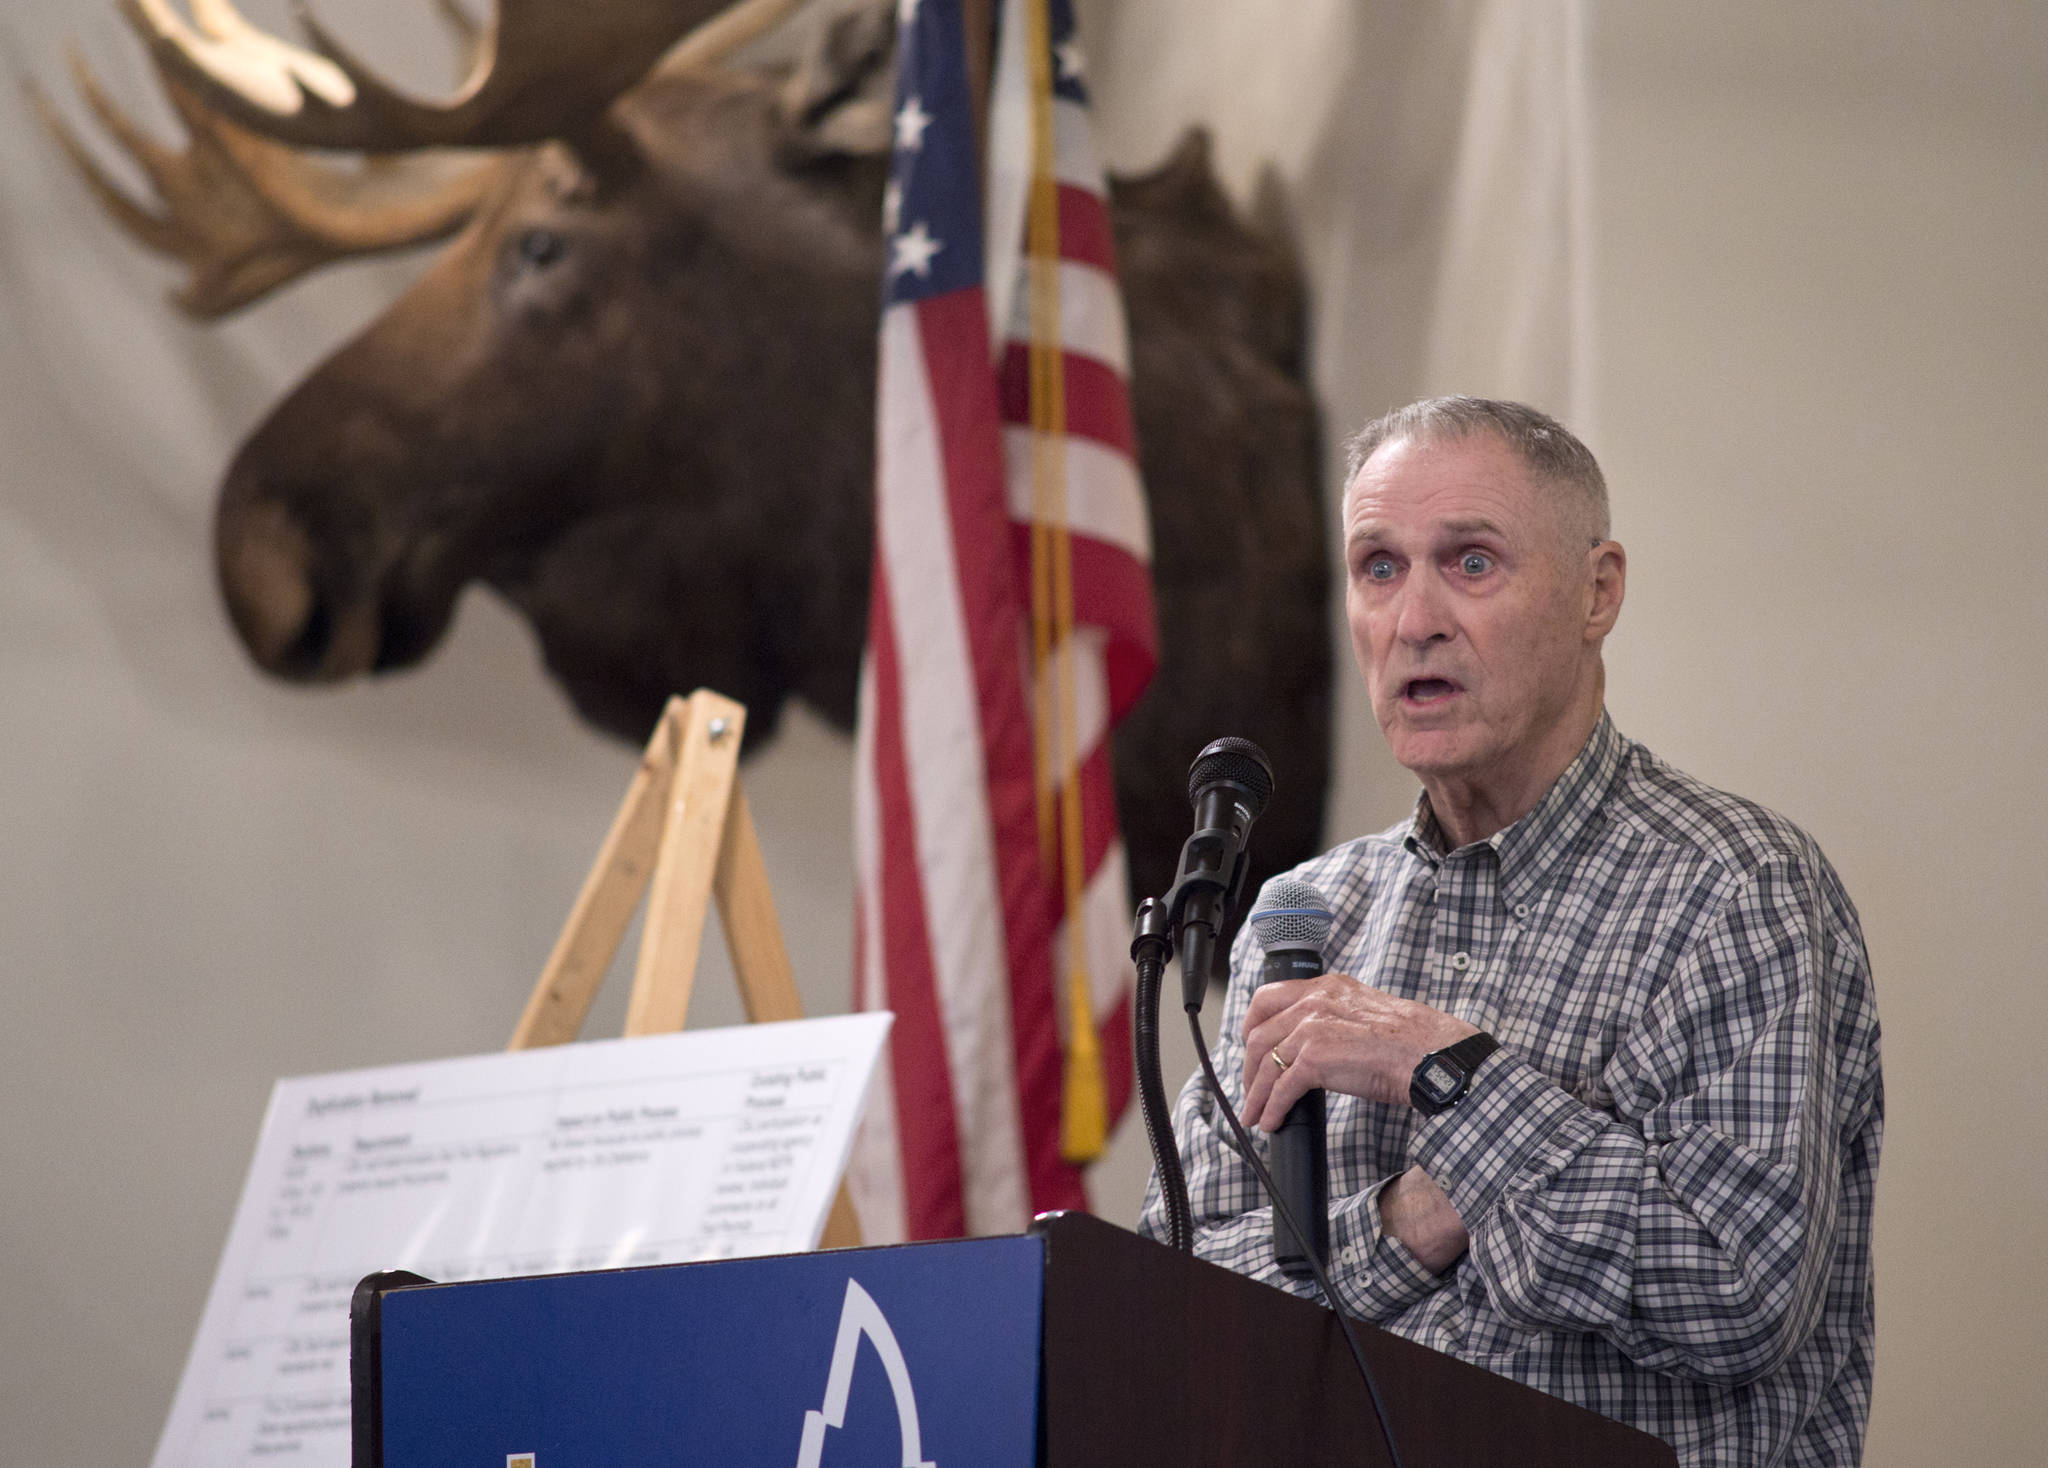 Long-time resident and local businessman Bill Corbus speaks to the Juneau Chamber of Commerce during their weekly luncheon in May 2017. Corbus will speak to the chamber about taxing the oil industry. (Michael Penn | Juneau Empire File)